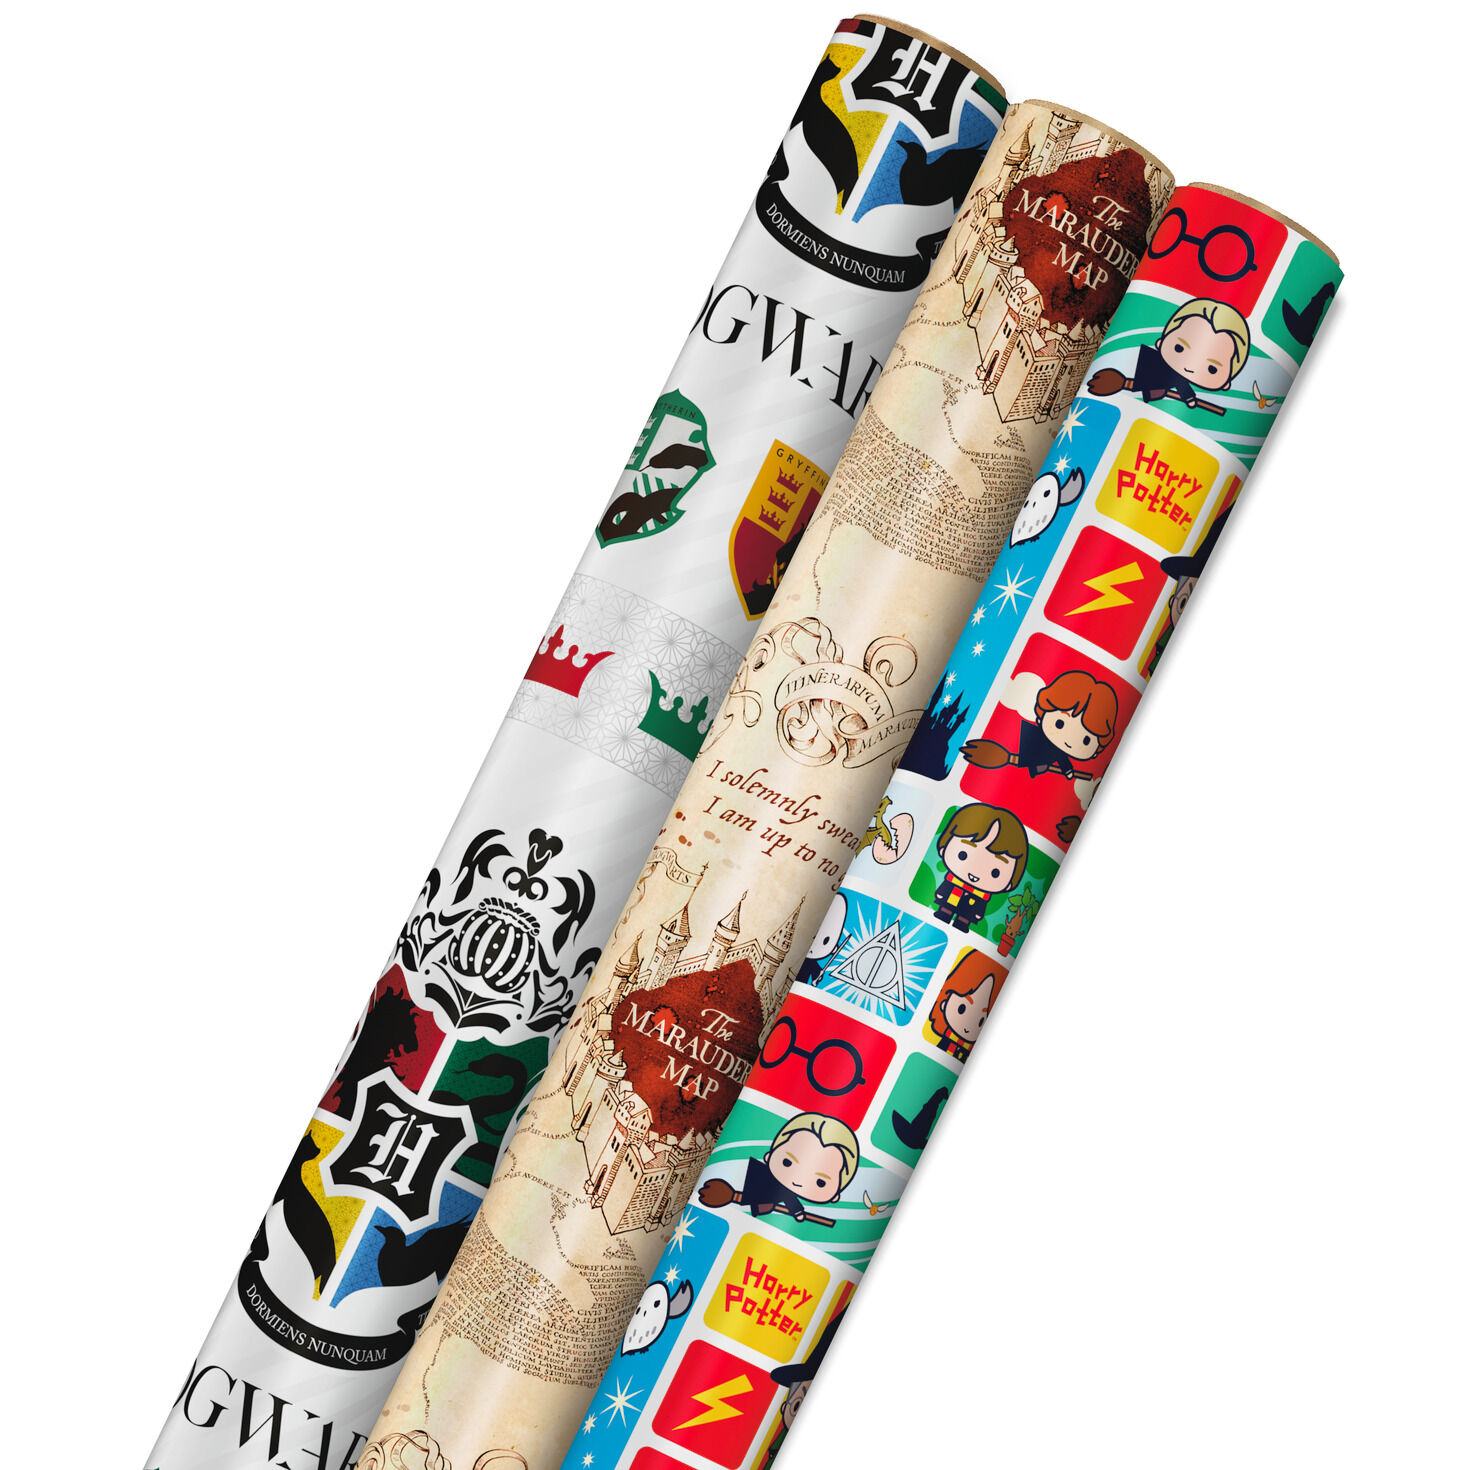 ALICE IN WONDERLAND GAME OF THRONES Wrapping Paper A1 or A2 HARRY POTTER 